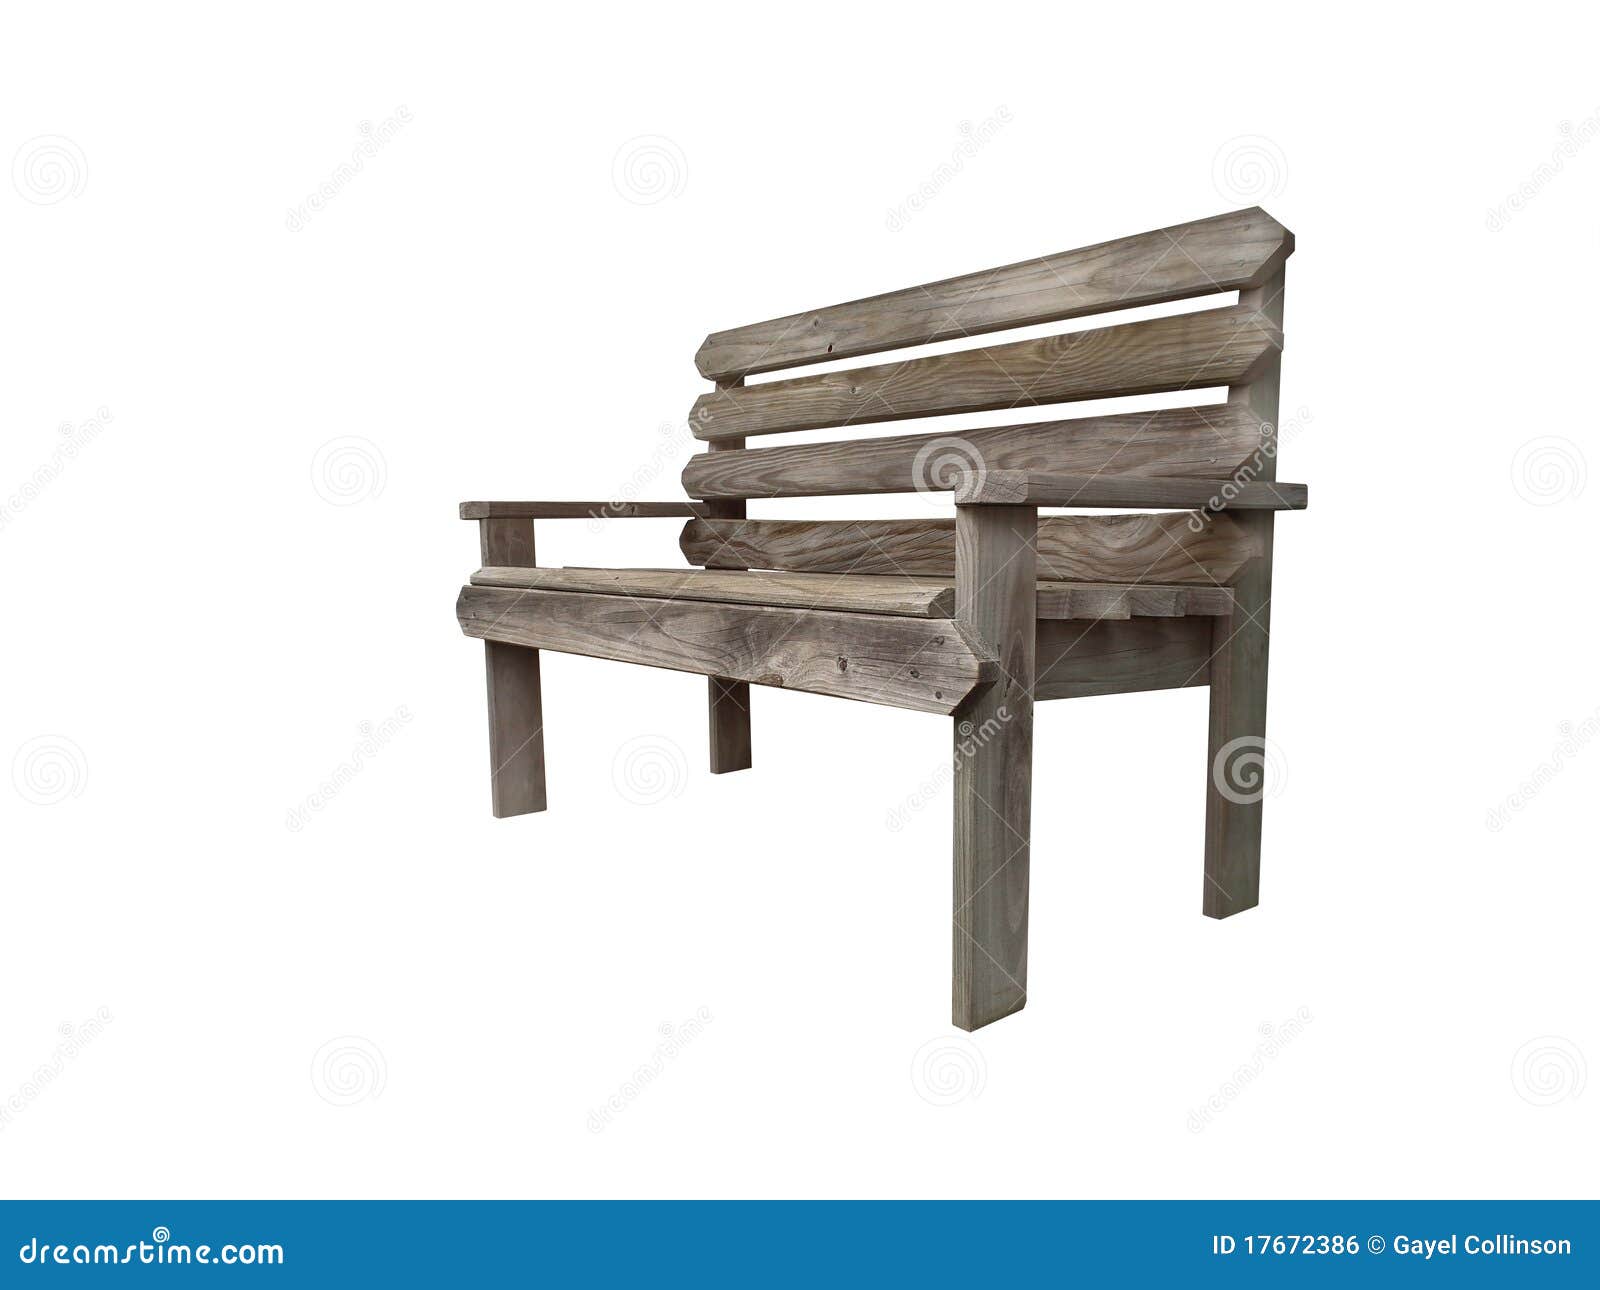 Pine wood unpainted outdoor bench isolated on white.